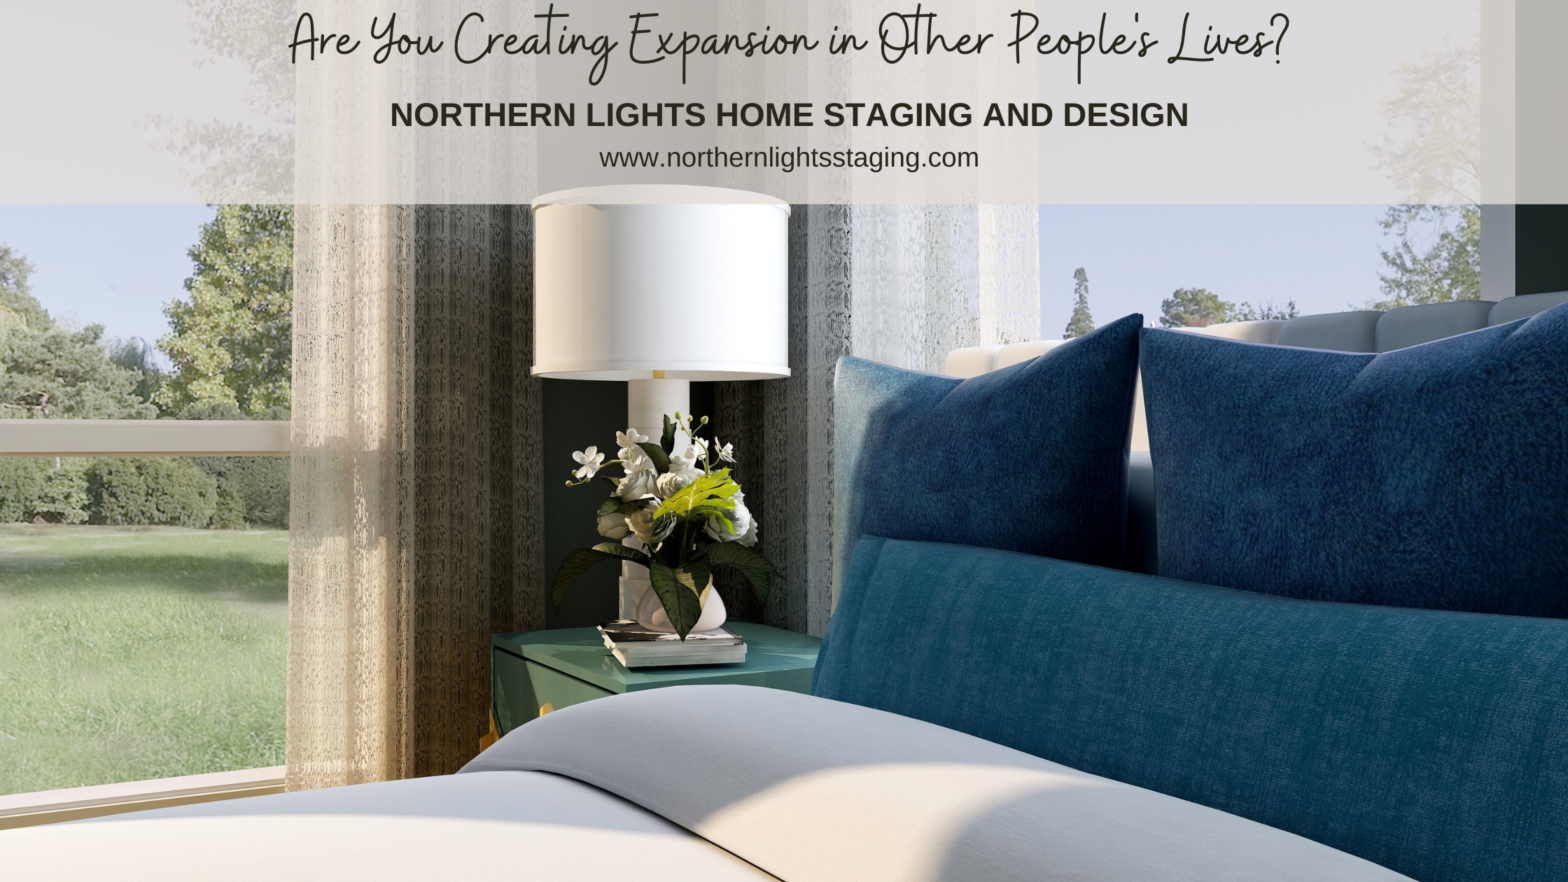 Are You Creating Expansion in Other People’s Lives?